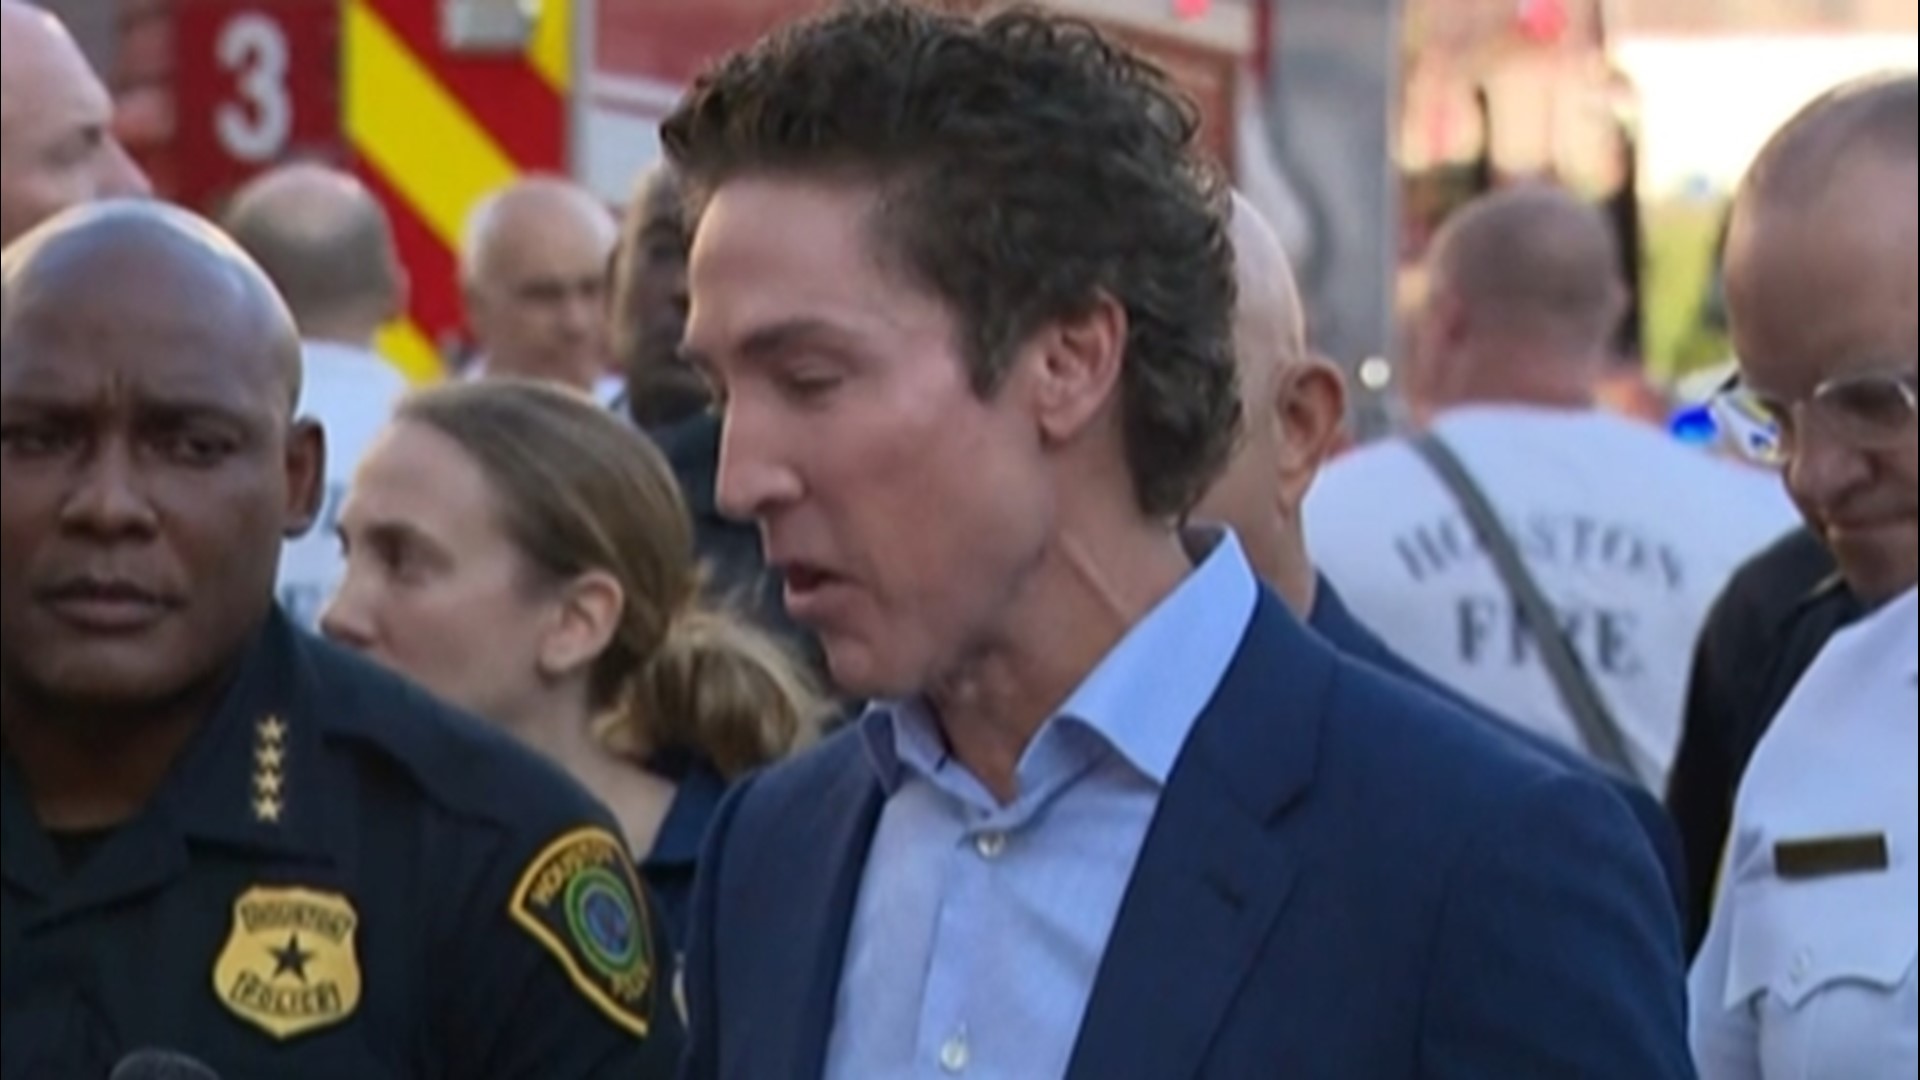 Osteen spoke Sunday at a news conference after a woman opened fire inside Lakewood Church.